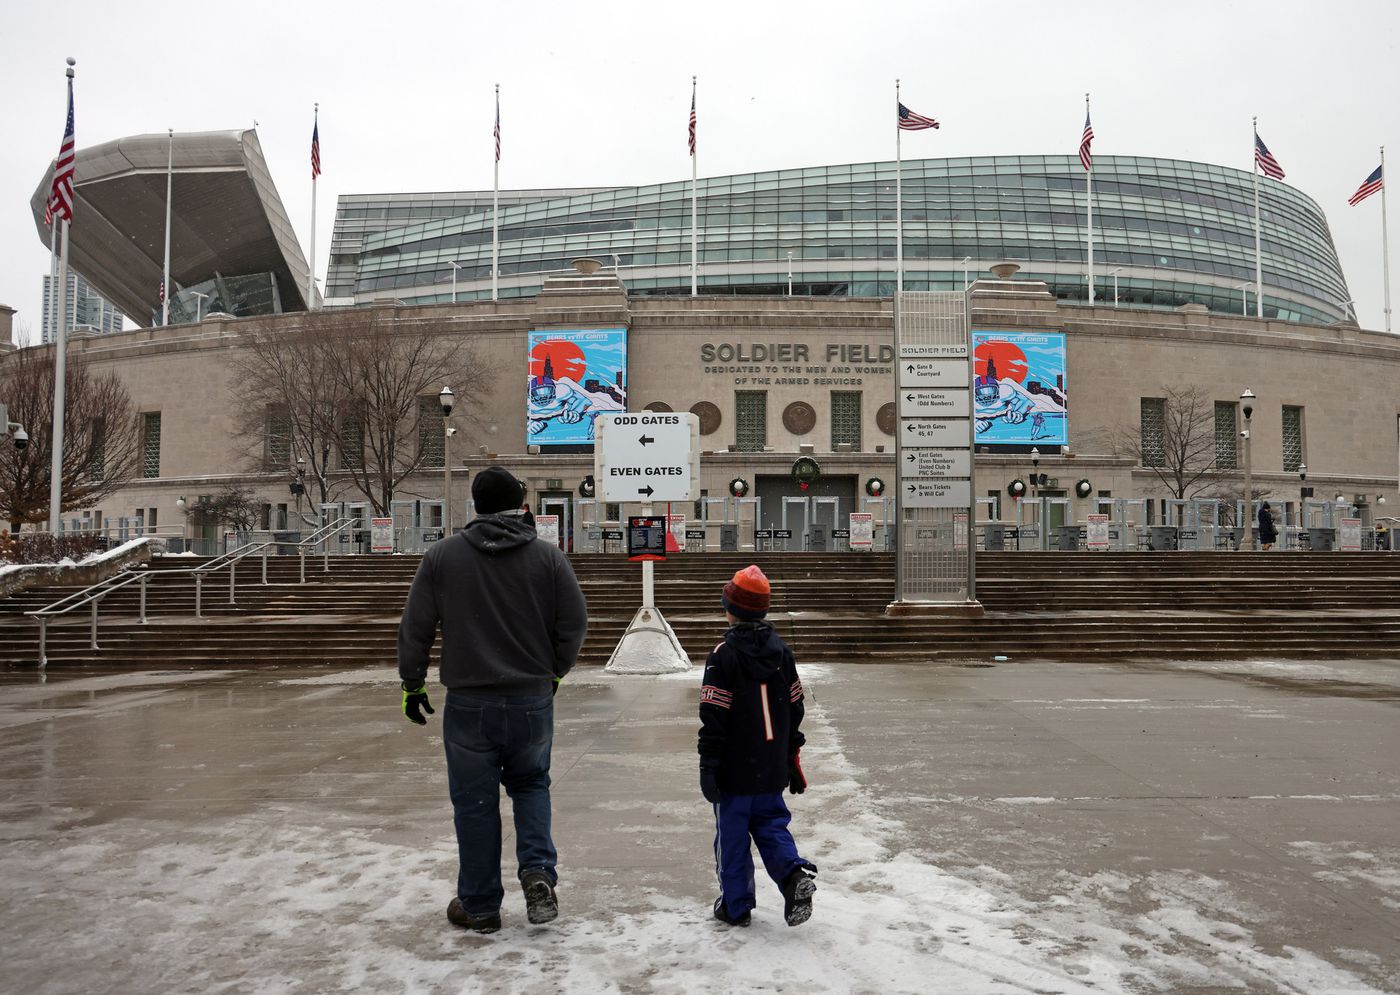 Fans arrive to Soldier Field before the Bears-Giants game on Jan. 2, 2022.